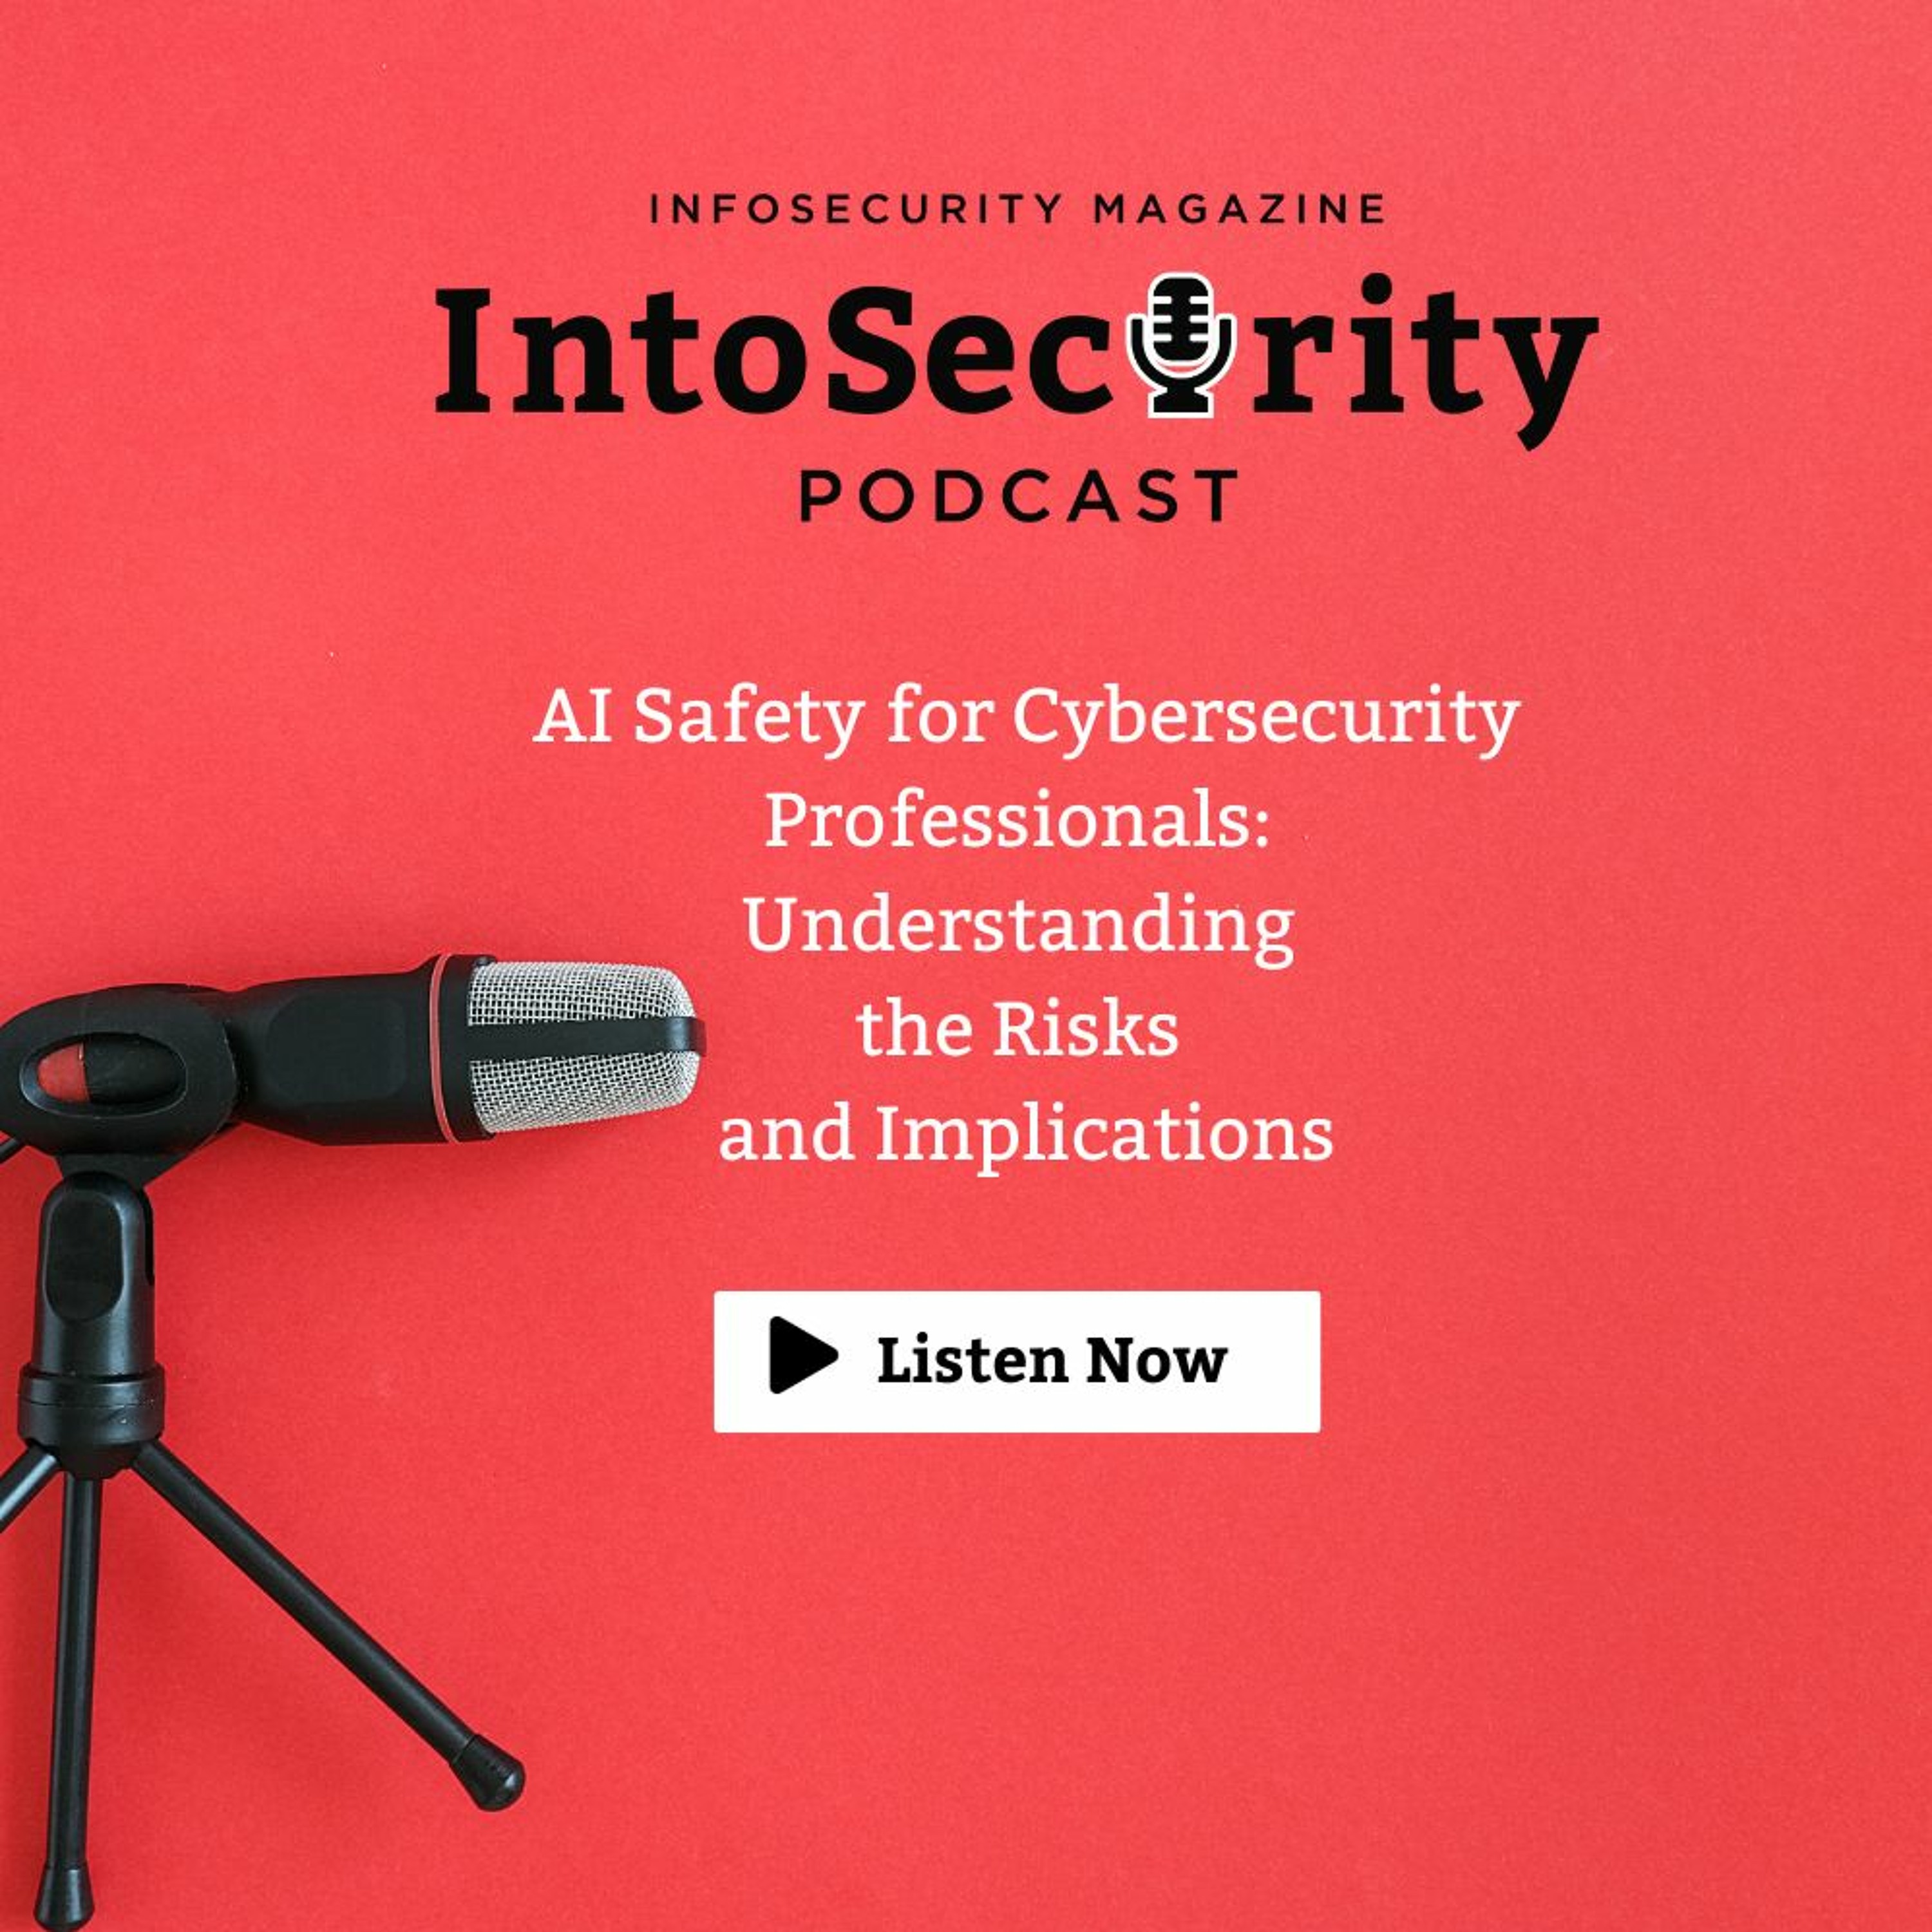 AI Safety for Cybersecurity Professionals: Understanding the Risks and Implications